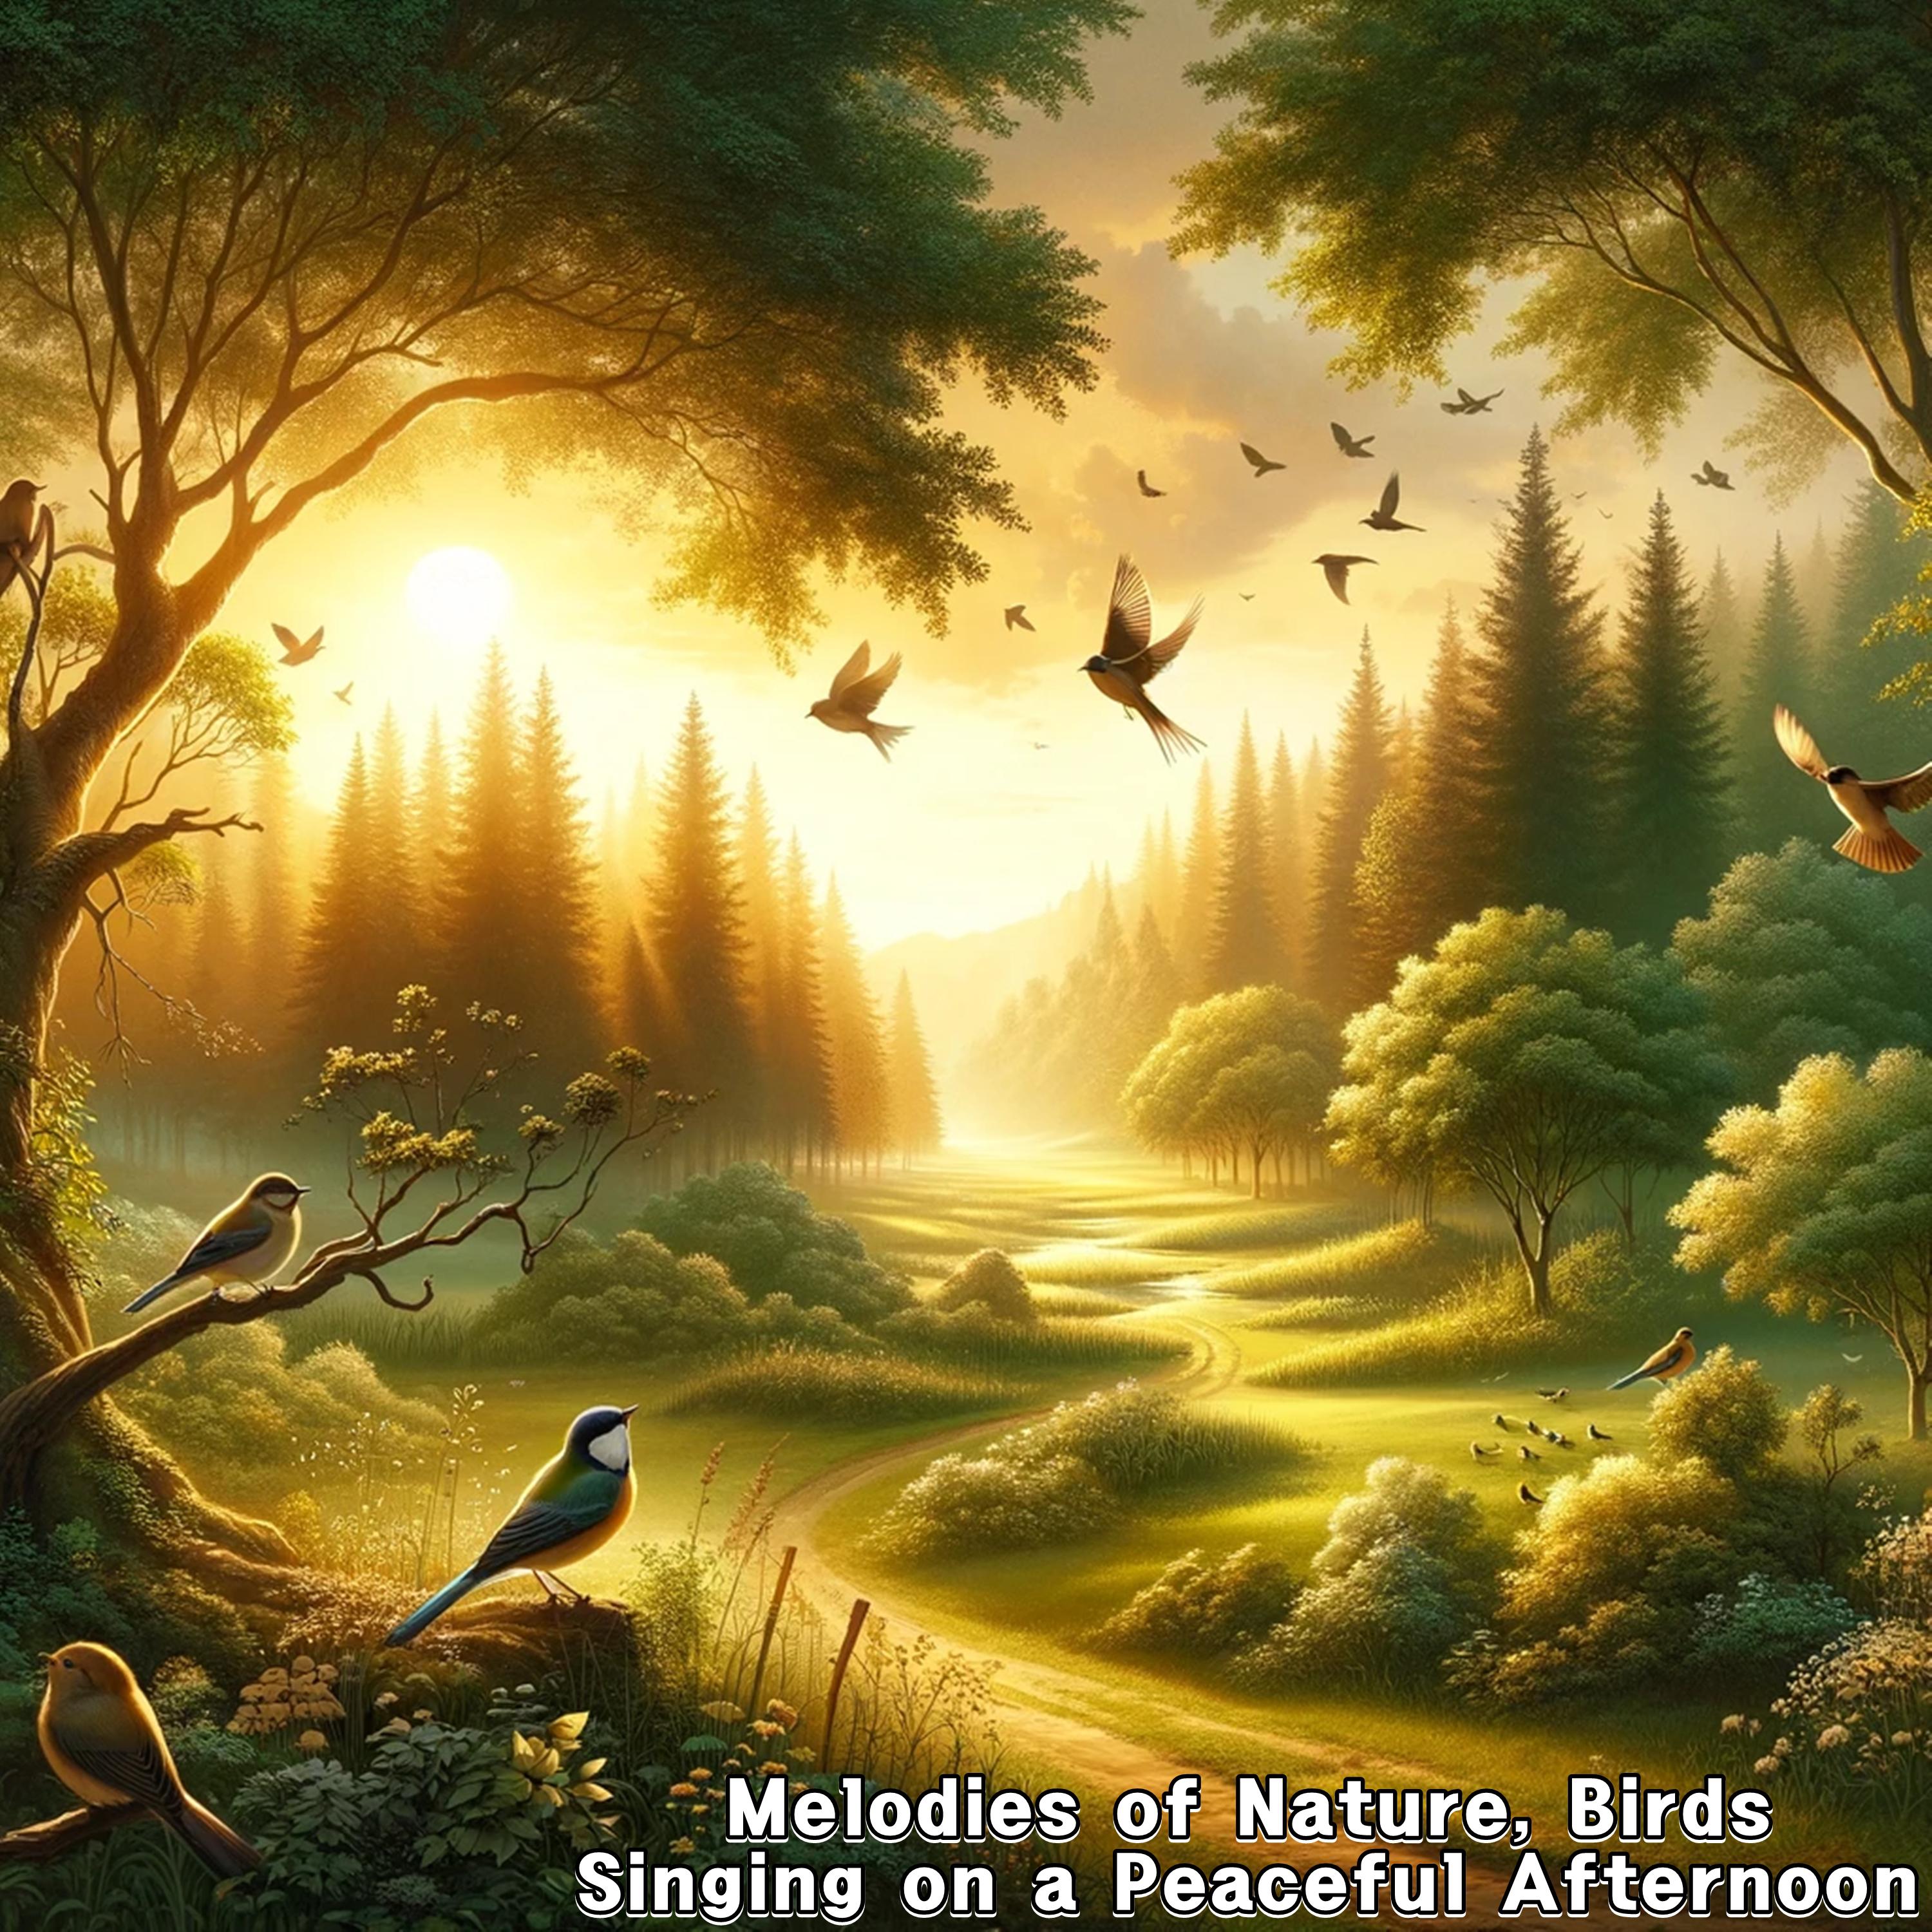 Singing Birds - Songs of the Forest, Birds Singing on a Peaceful Afternoon